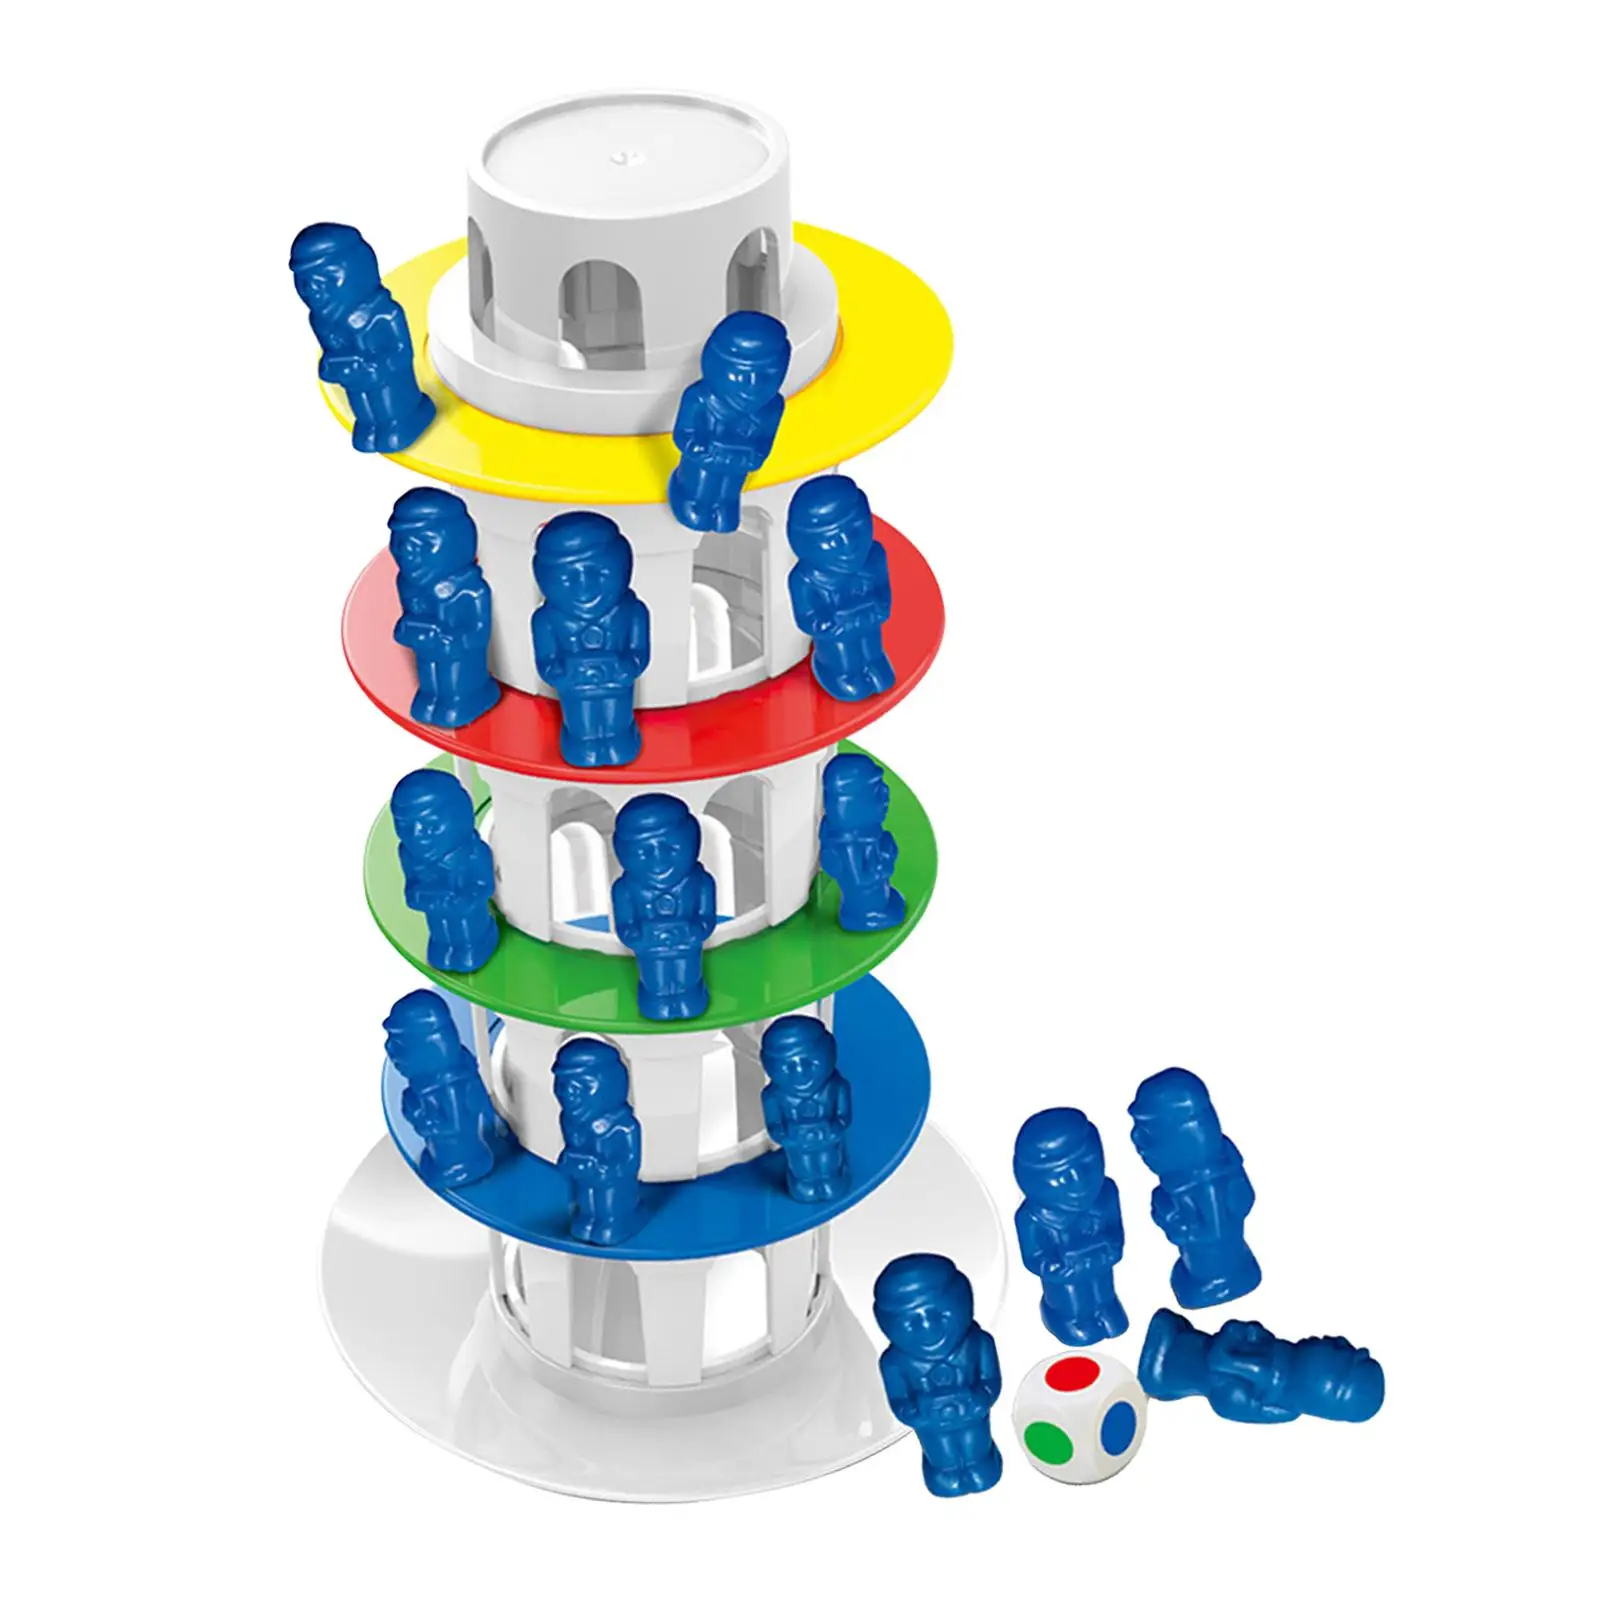 Tower Stacking Montessori Building Blocks Family Games Educational Toys Toppling Leaning Tower Toy for Children Gifts